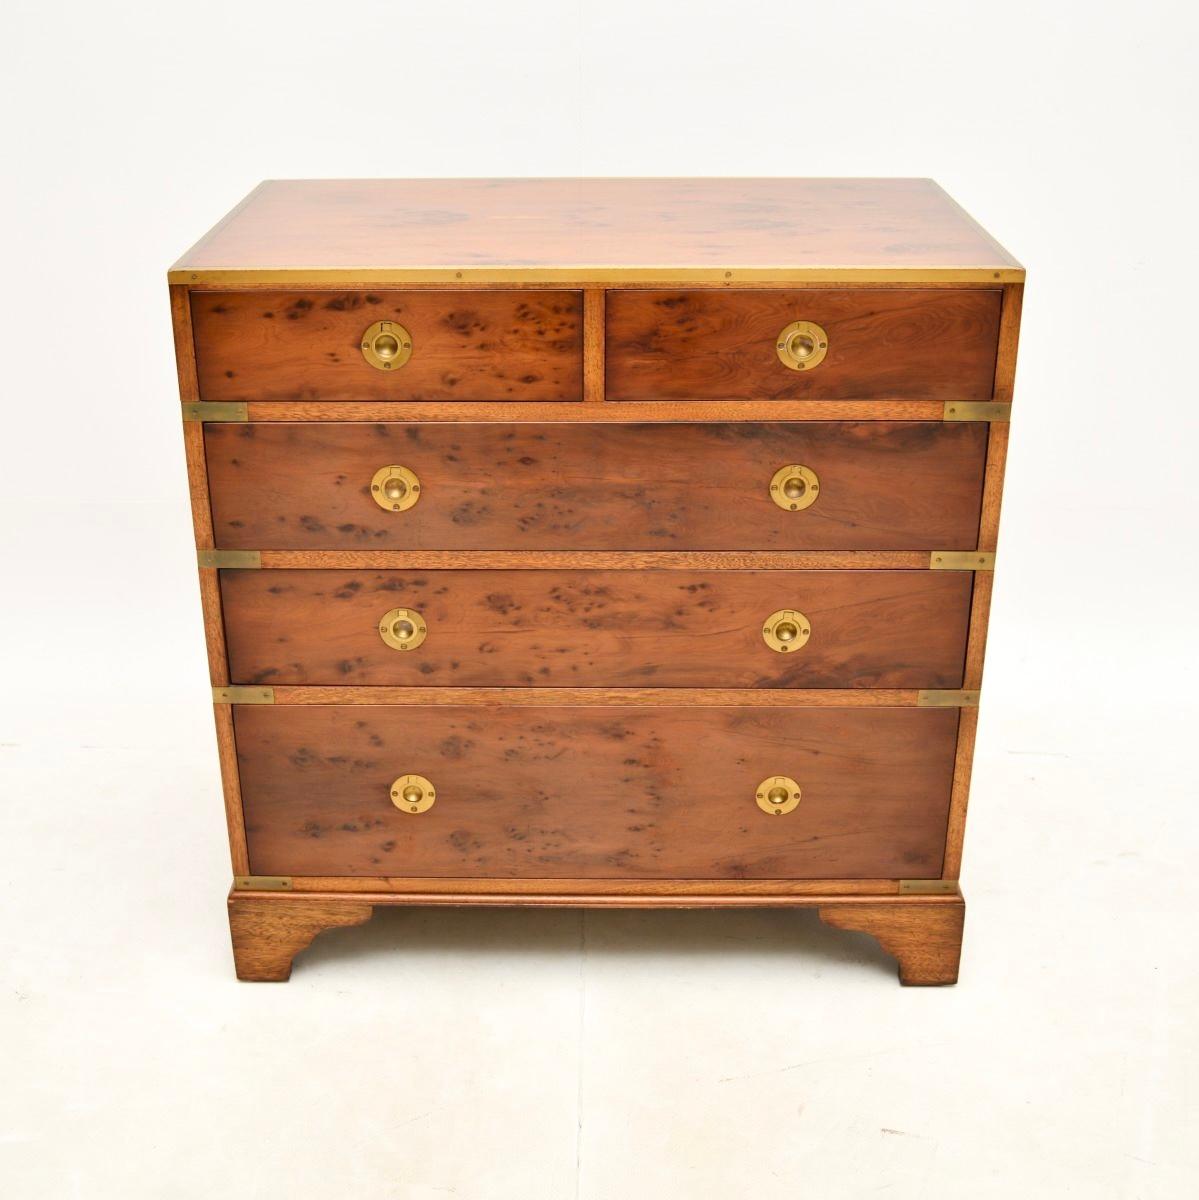 A fantastic antique military campaign style chest of drawers in yew wood. This was made in England, it dates from around the 1930’s.

It is of superb quality and is a very useful size. The yew wood has a gorgeous colour tone and grain patterns, this